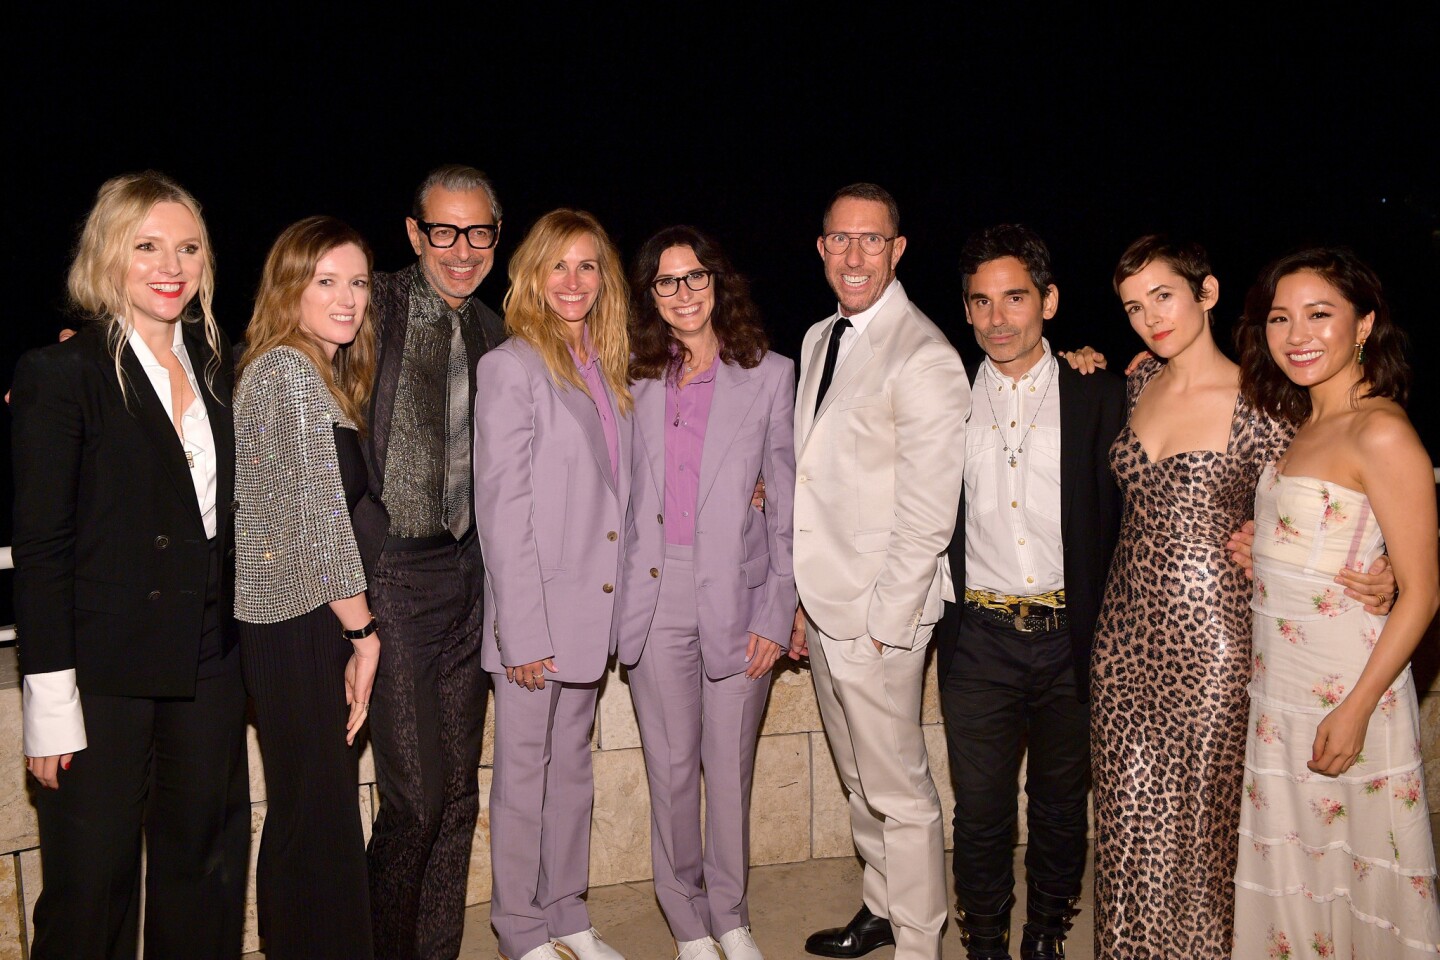 InStyle magazine Editor in Chief Laura Brown, left, stands with 2018 InStyle Awards honorees, continuing from left, Clare Waight Keller, Jeff Goldblum, Julia Roberts, Elizabeth Stewart, Chris McMillan, James Kaliardos, Karla Welch and Constance Wu.